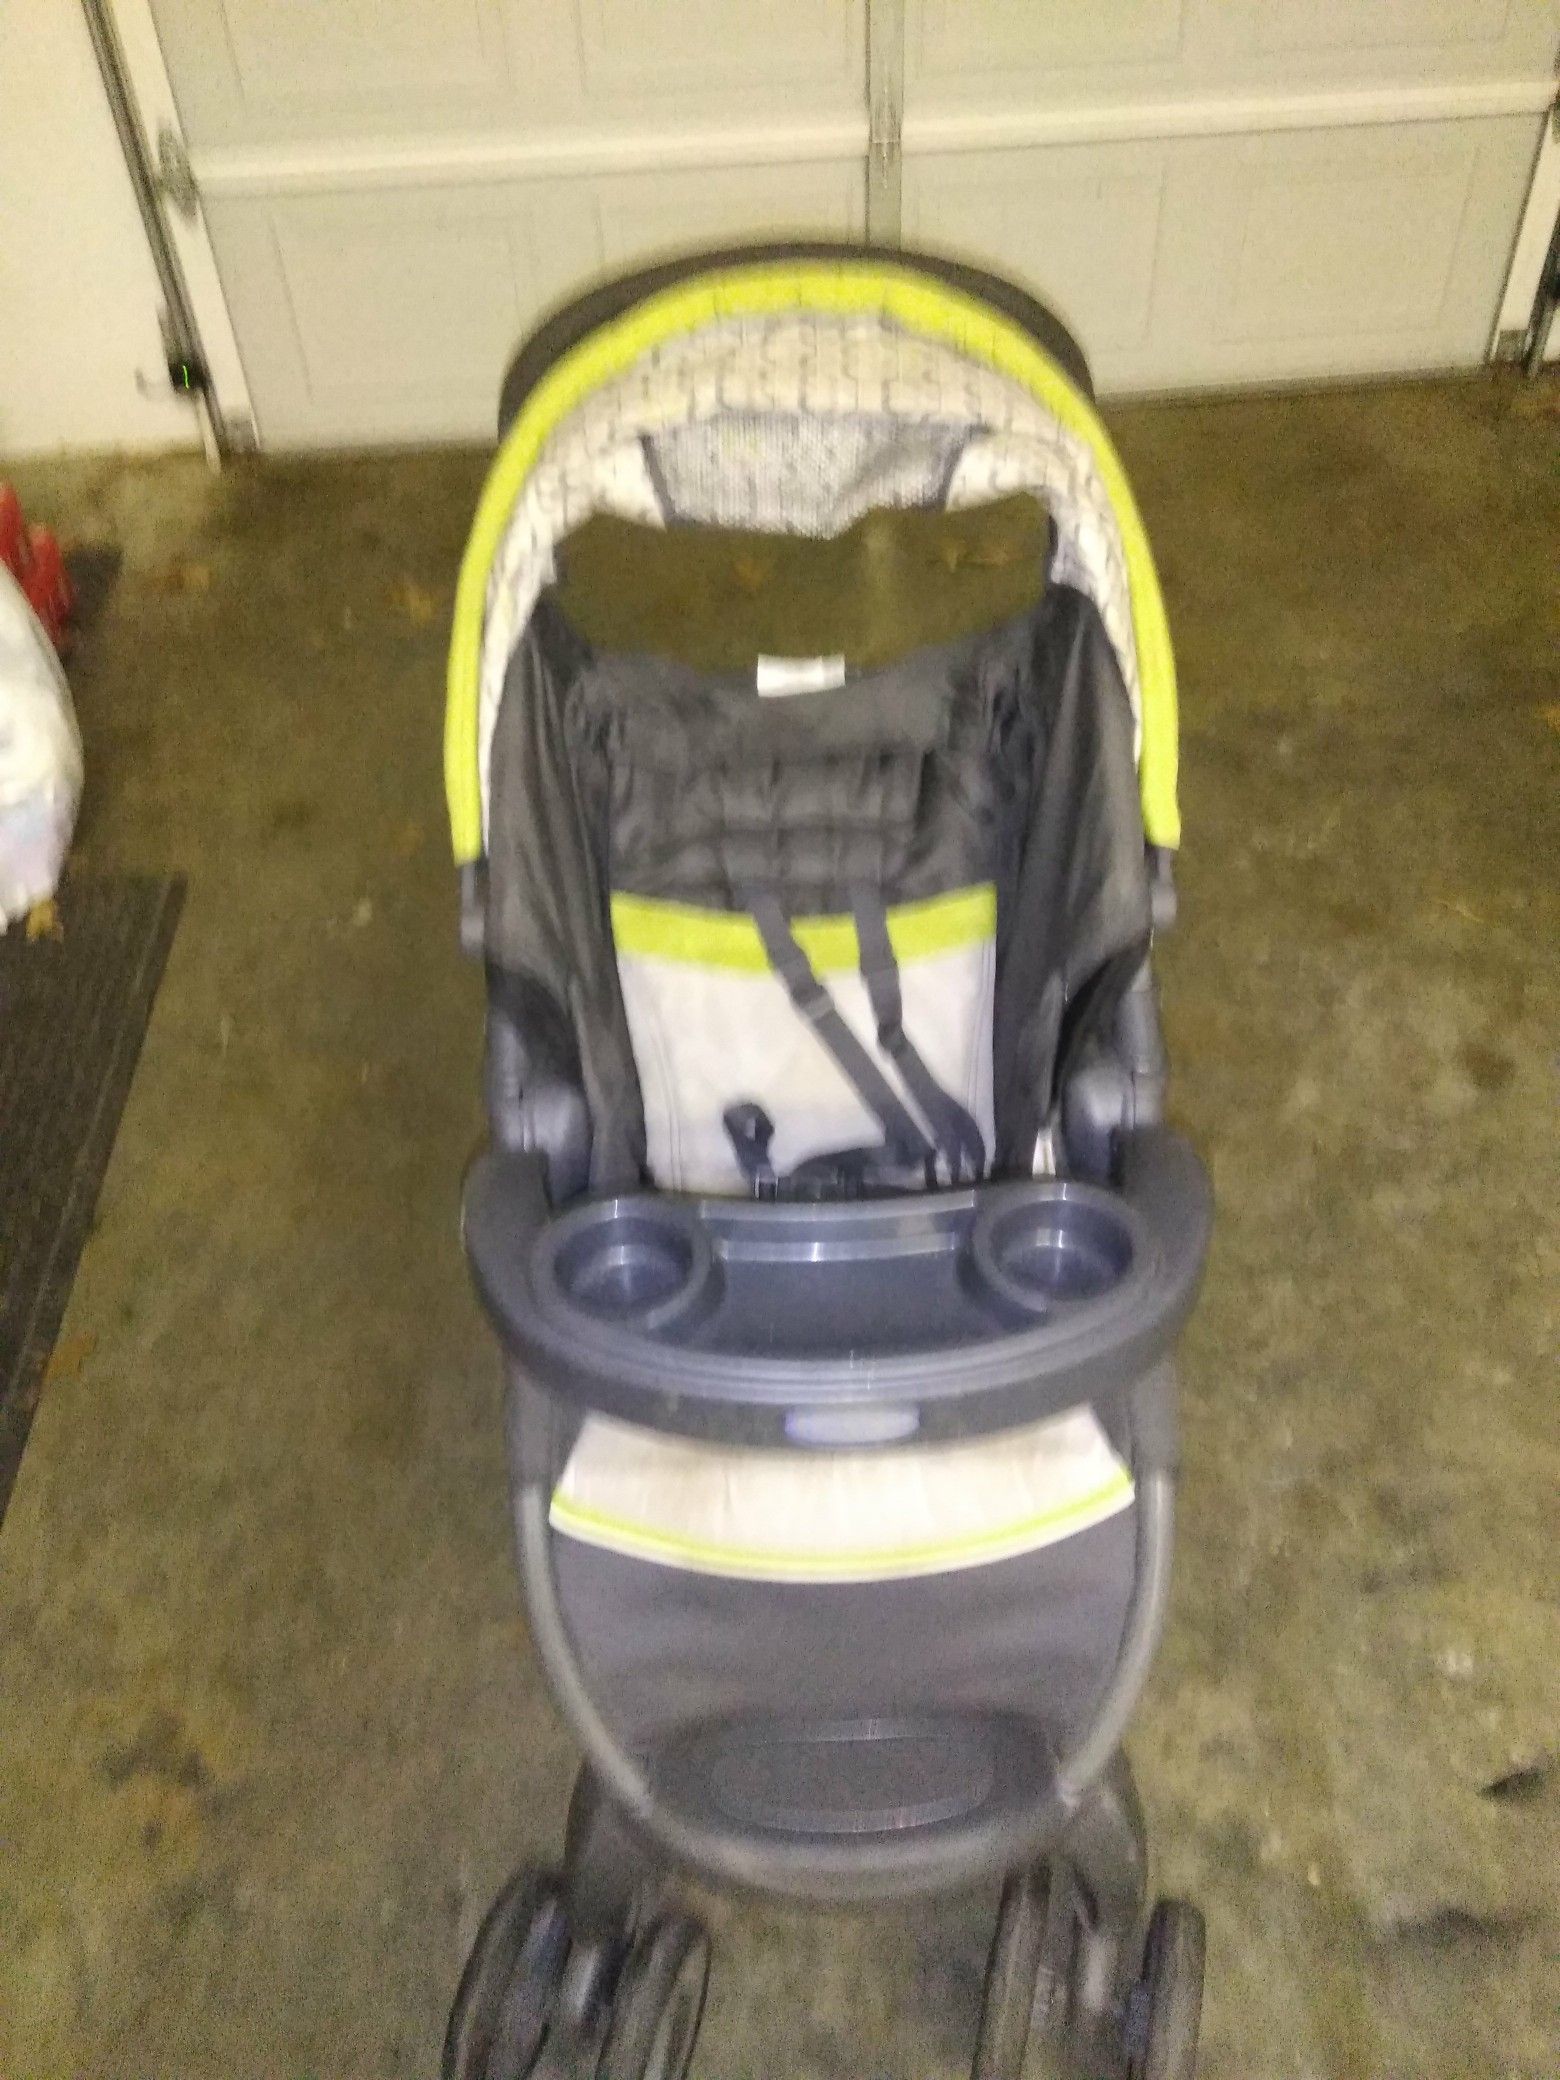 Graco snap and go car seat and stroller